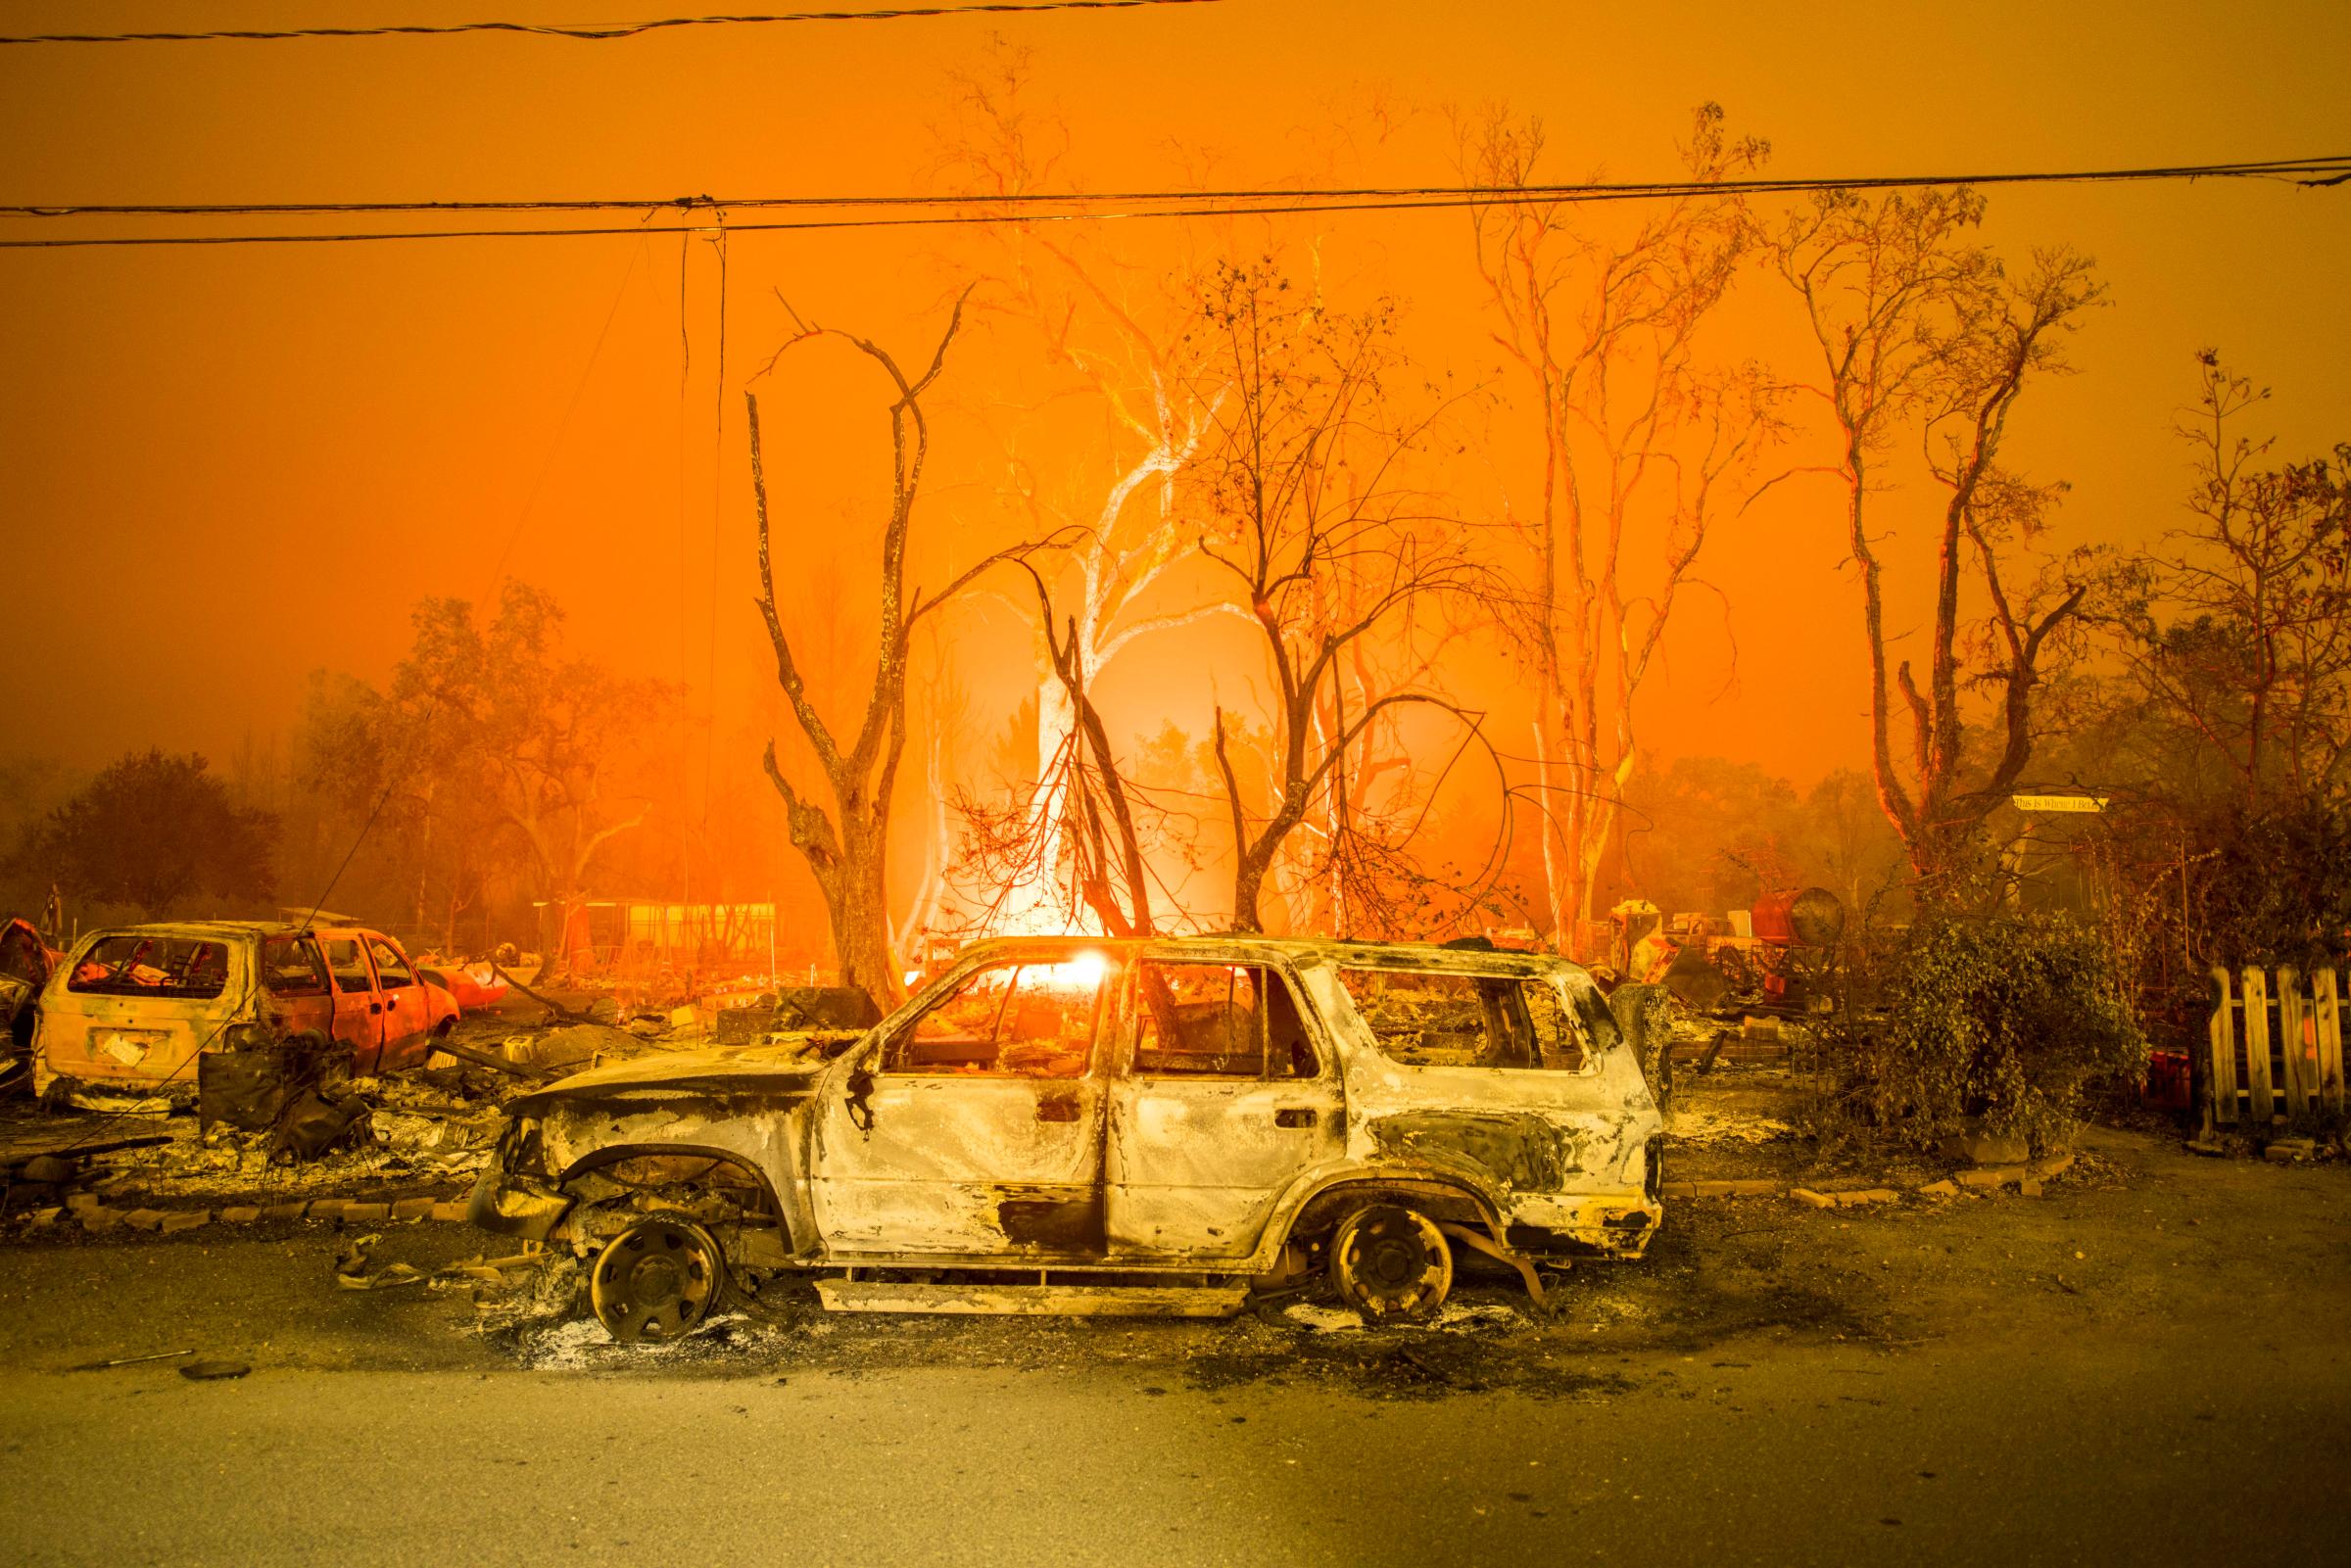 A burned out truck sits in front of a destroyed structure in Middletown, CA Sunday evening. Valley Fire in Lake and Sonoma Counties Sunday September 13th, 2015. As of Sunday evening the fire had burned over 50,000 acres and was 0% contained. The Associated Press reported that at least one person was killed due to the fire.